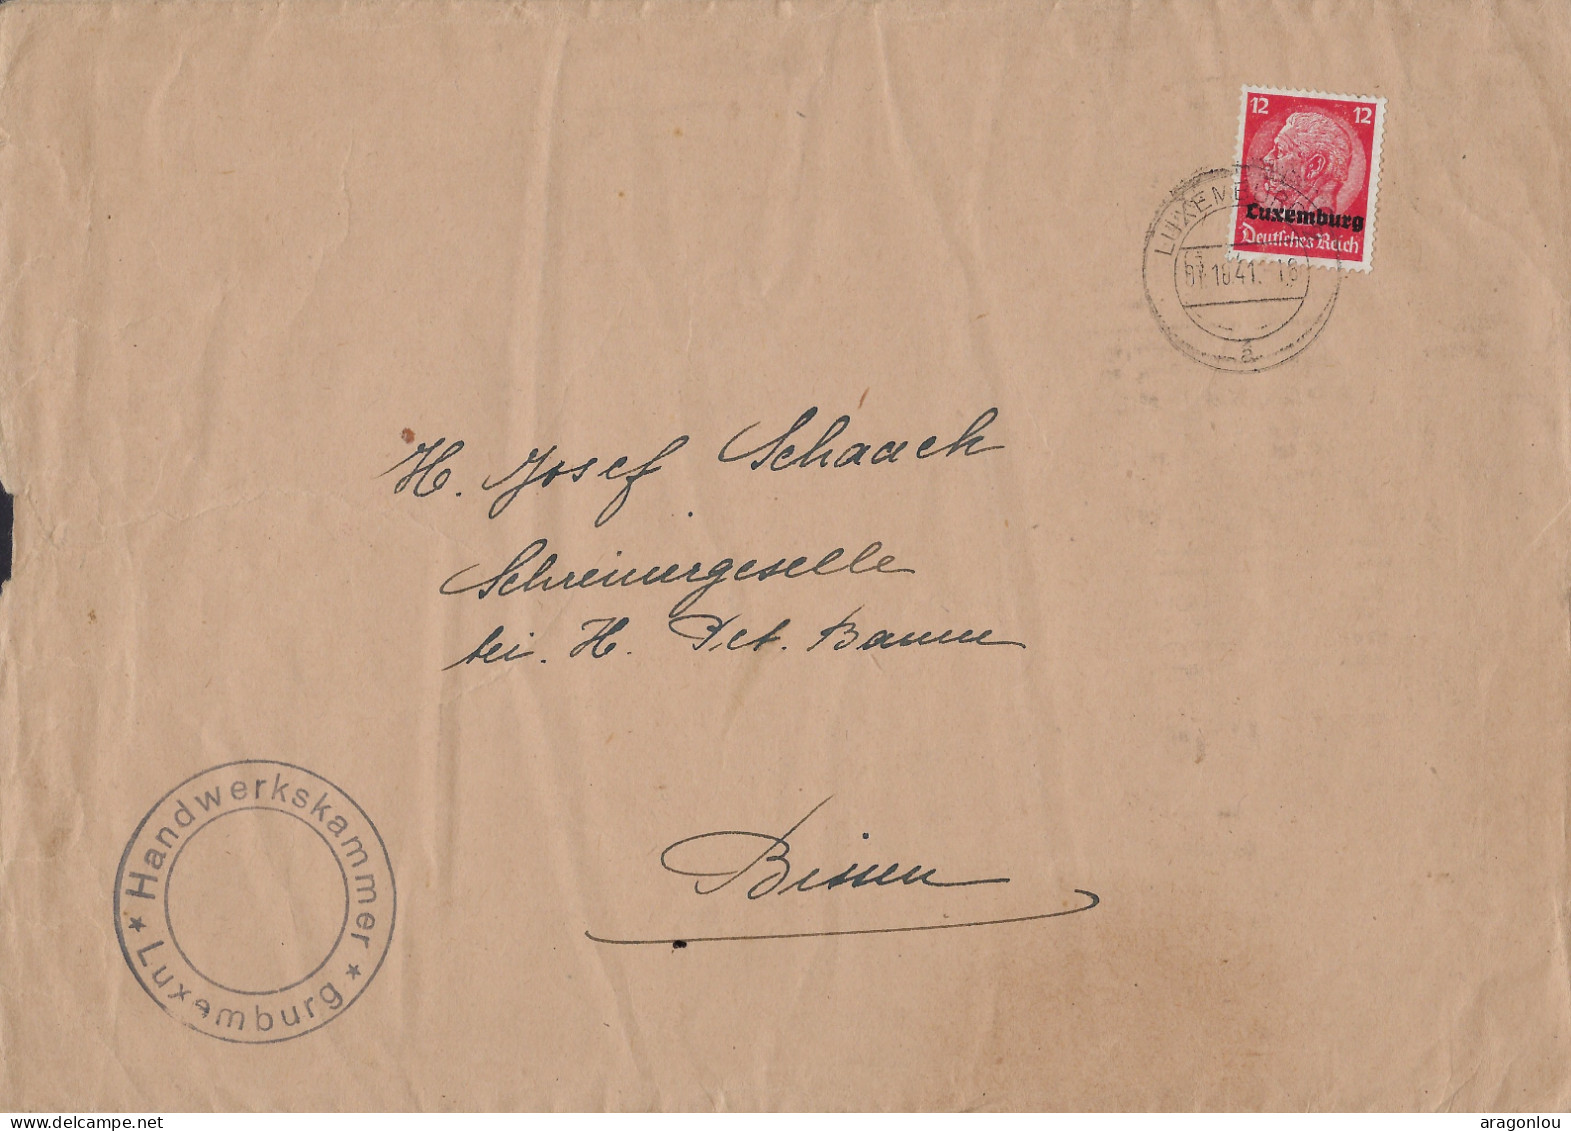 Luxembourg - Luxemburg -   Lettre  Occupation   1941 - 1940-1944 Ocupación Alemana